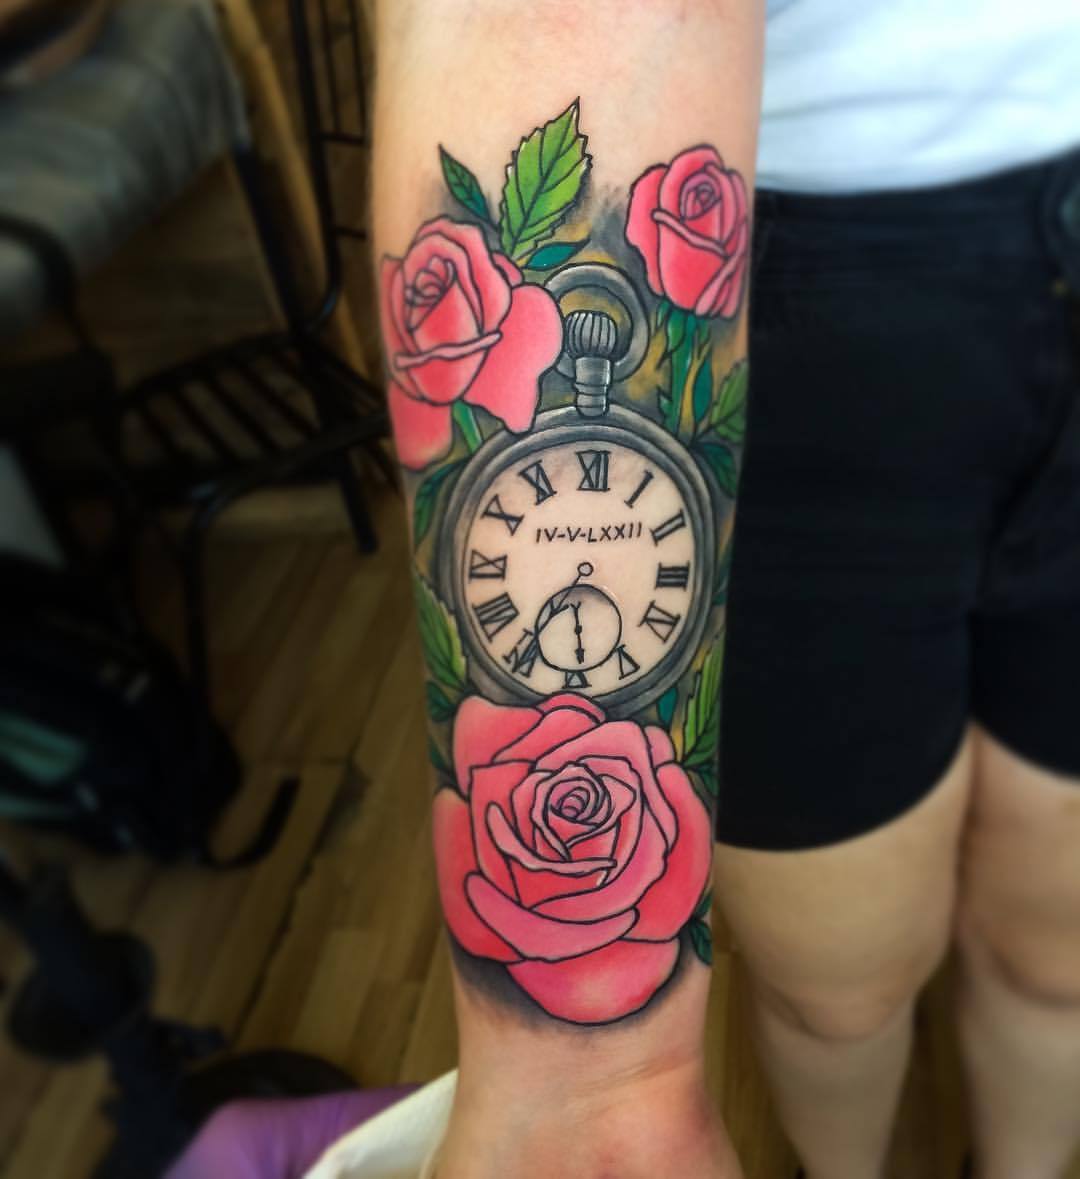 💀✖️ Colored clock and roses tattoo, I hope you like it! Have a great week.